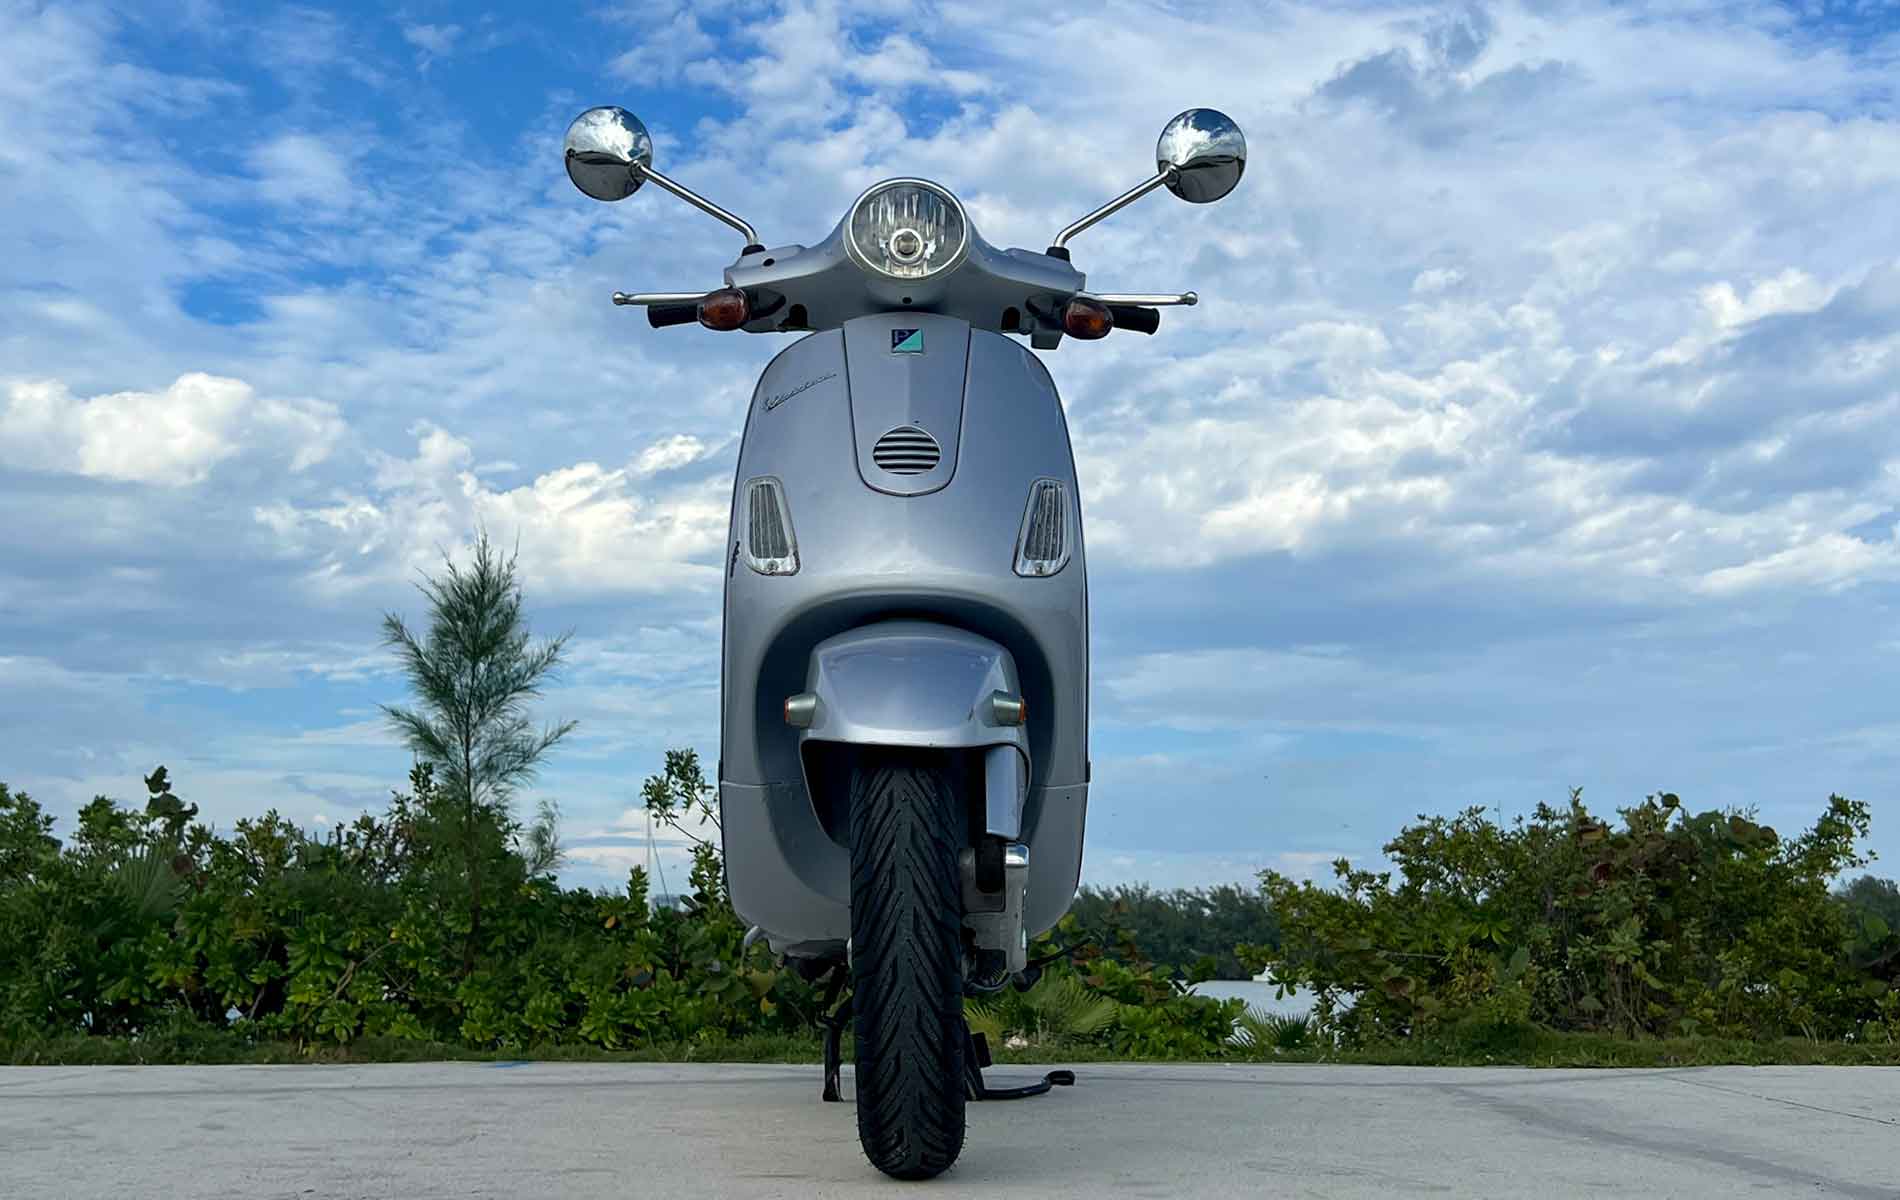 rent-a-vespa-lx-50cc-motorcycle-silver-front-side